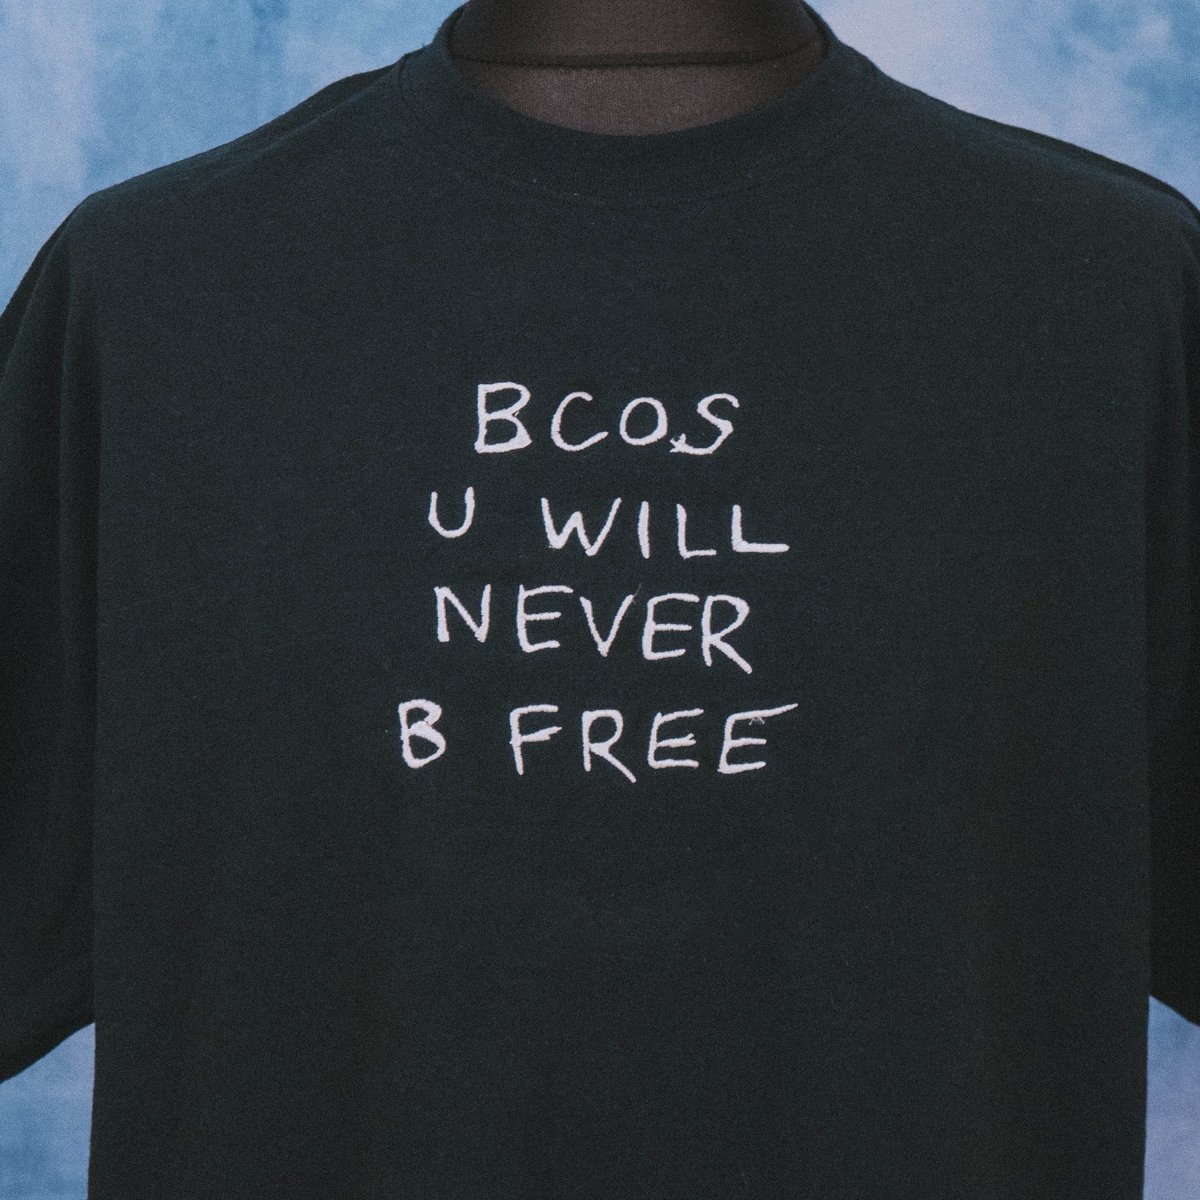 Rex Orange County - Bcos U Will Never B Free Unisex Embroidered T-Shirt